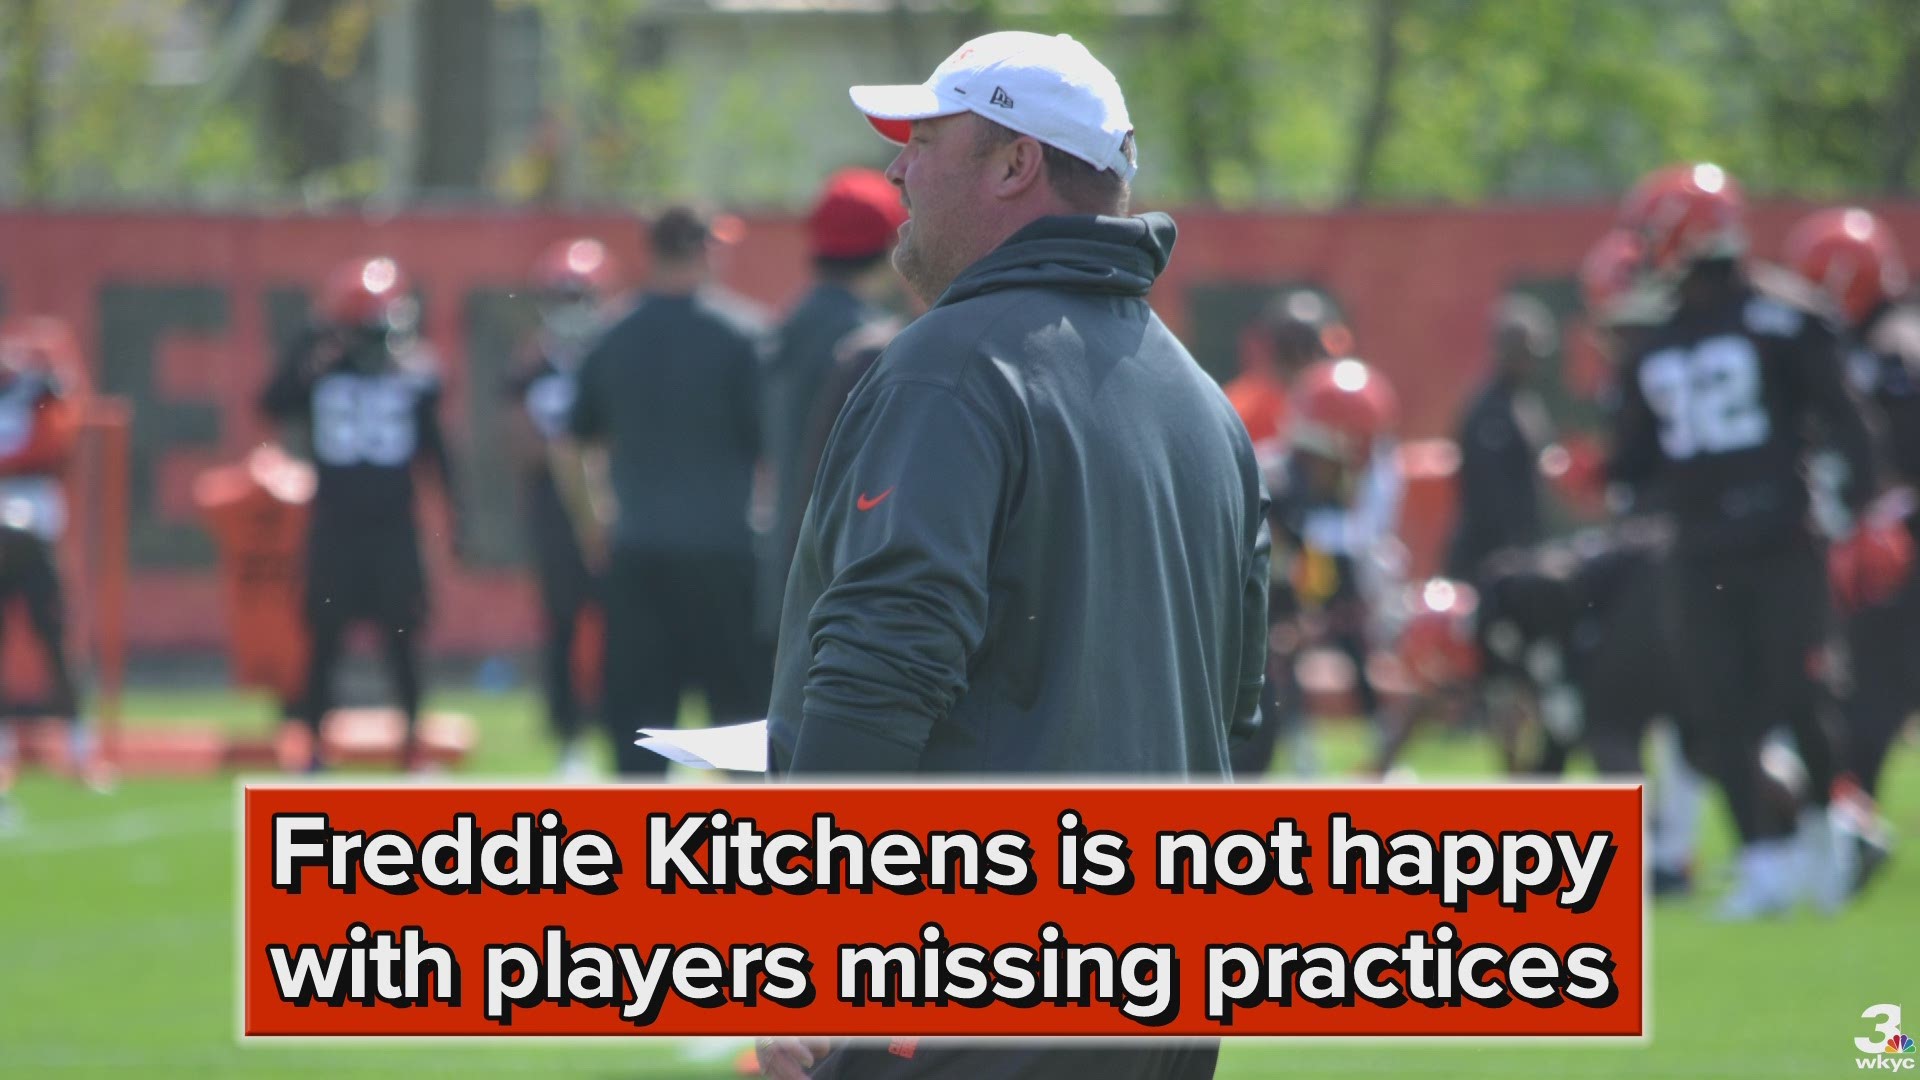 Cleveland Browns coach Freddie Kitchens is not happy with players missing practices during the offseason program, but he understands the workouts are voluntary.